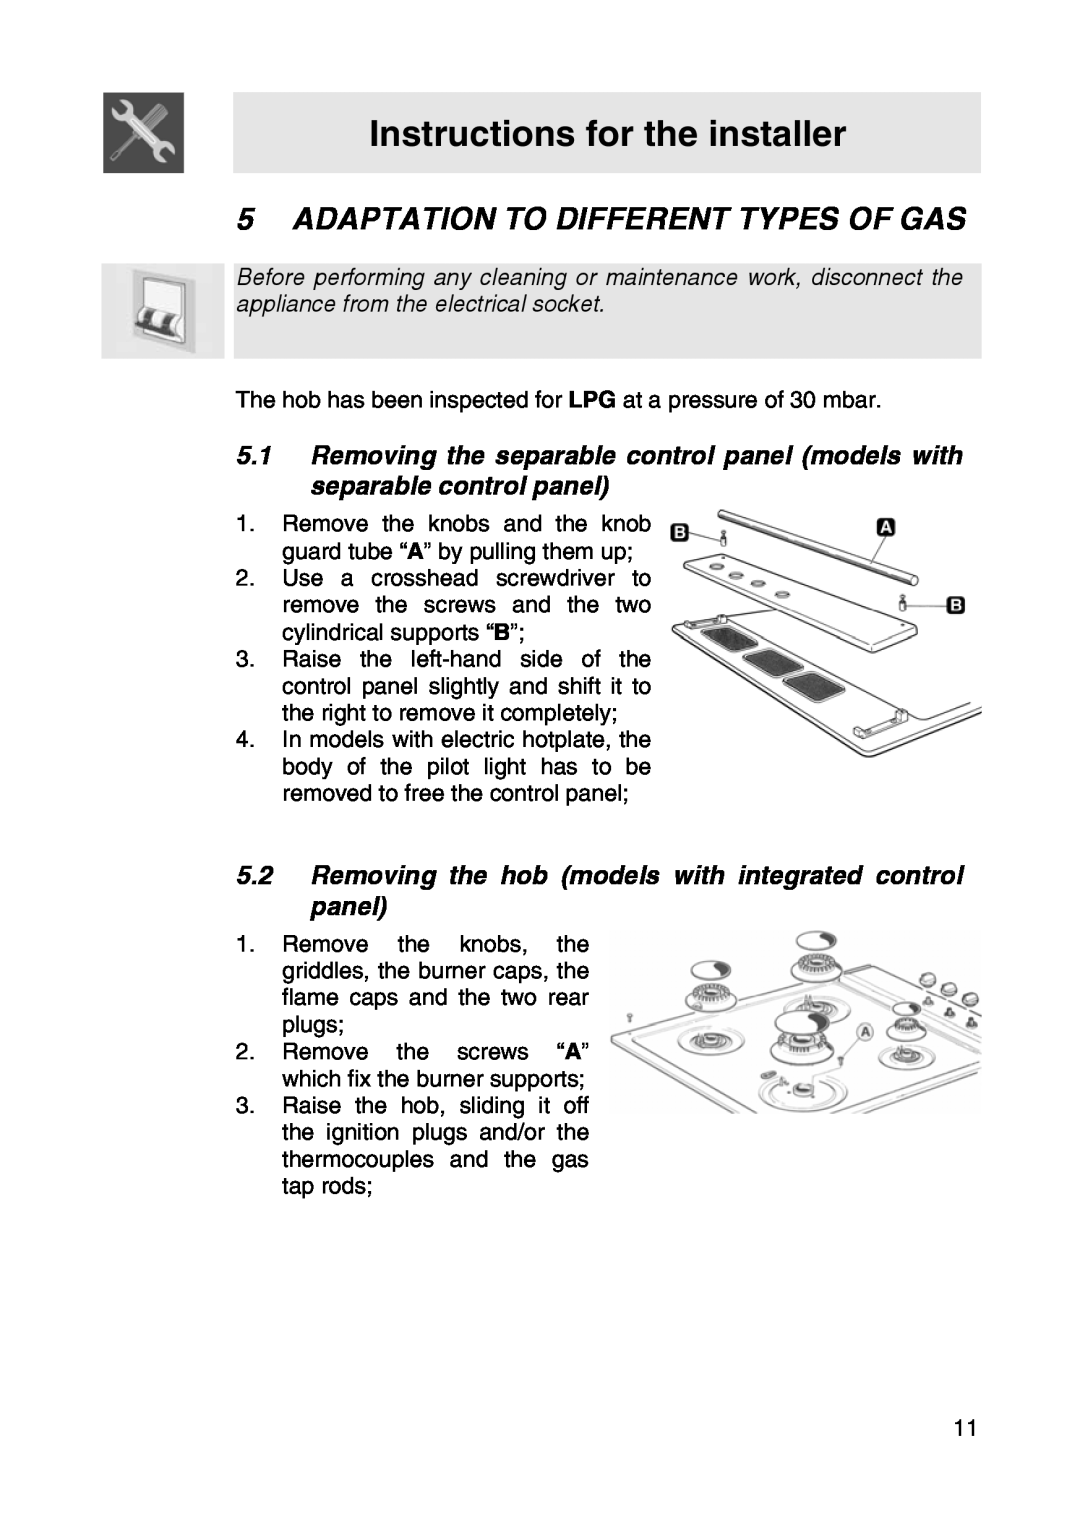 Smeg SER63LPG3 manual Adaptation To Different Types Of Gas, Instructions for the installer 